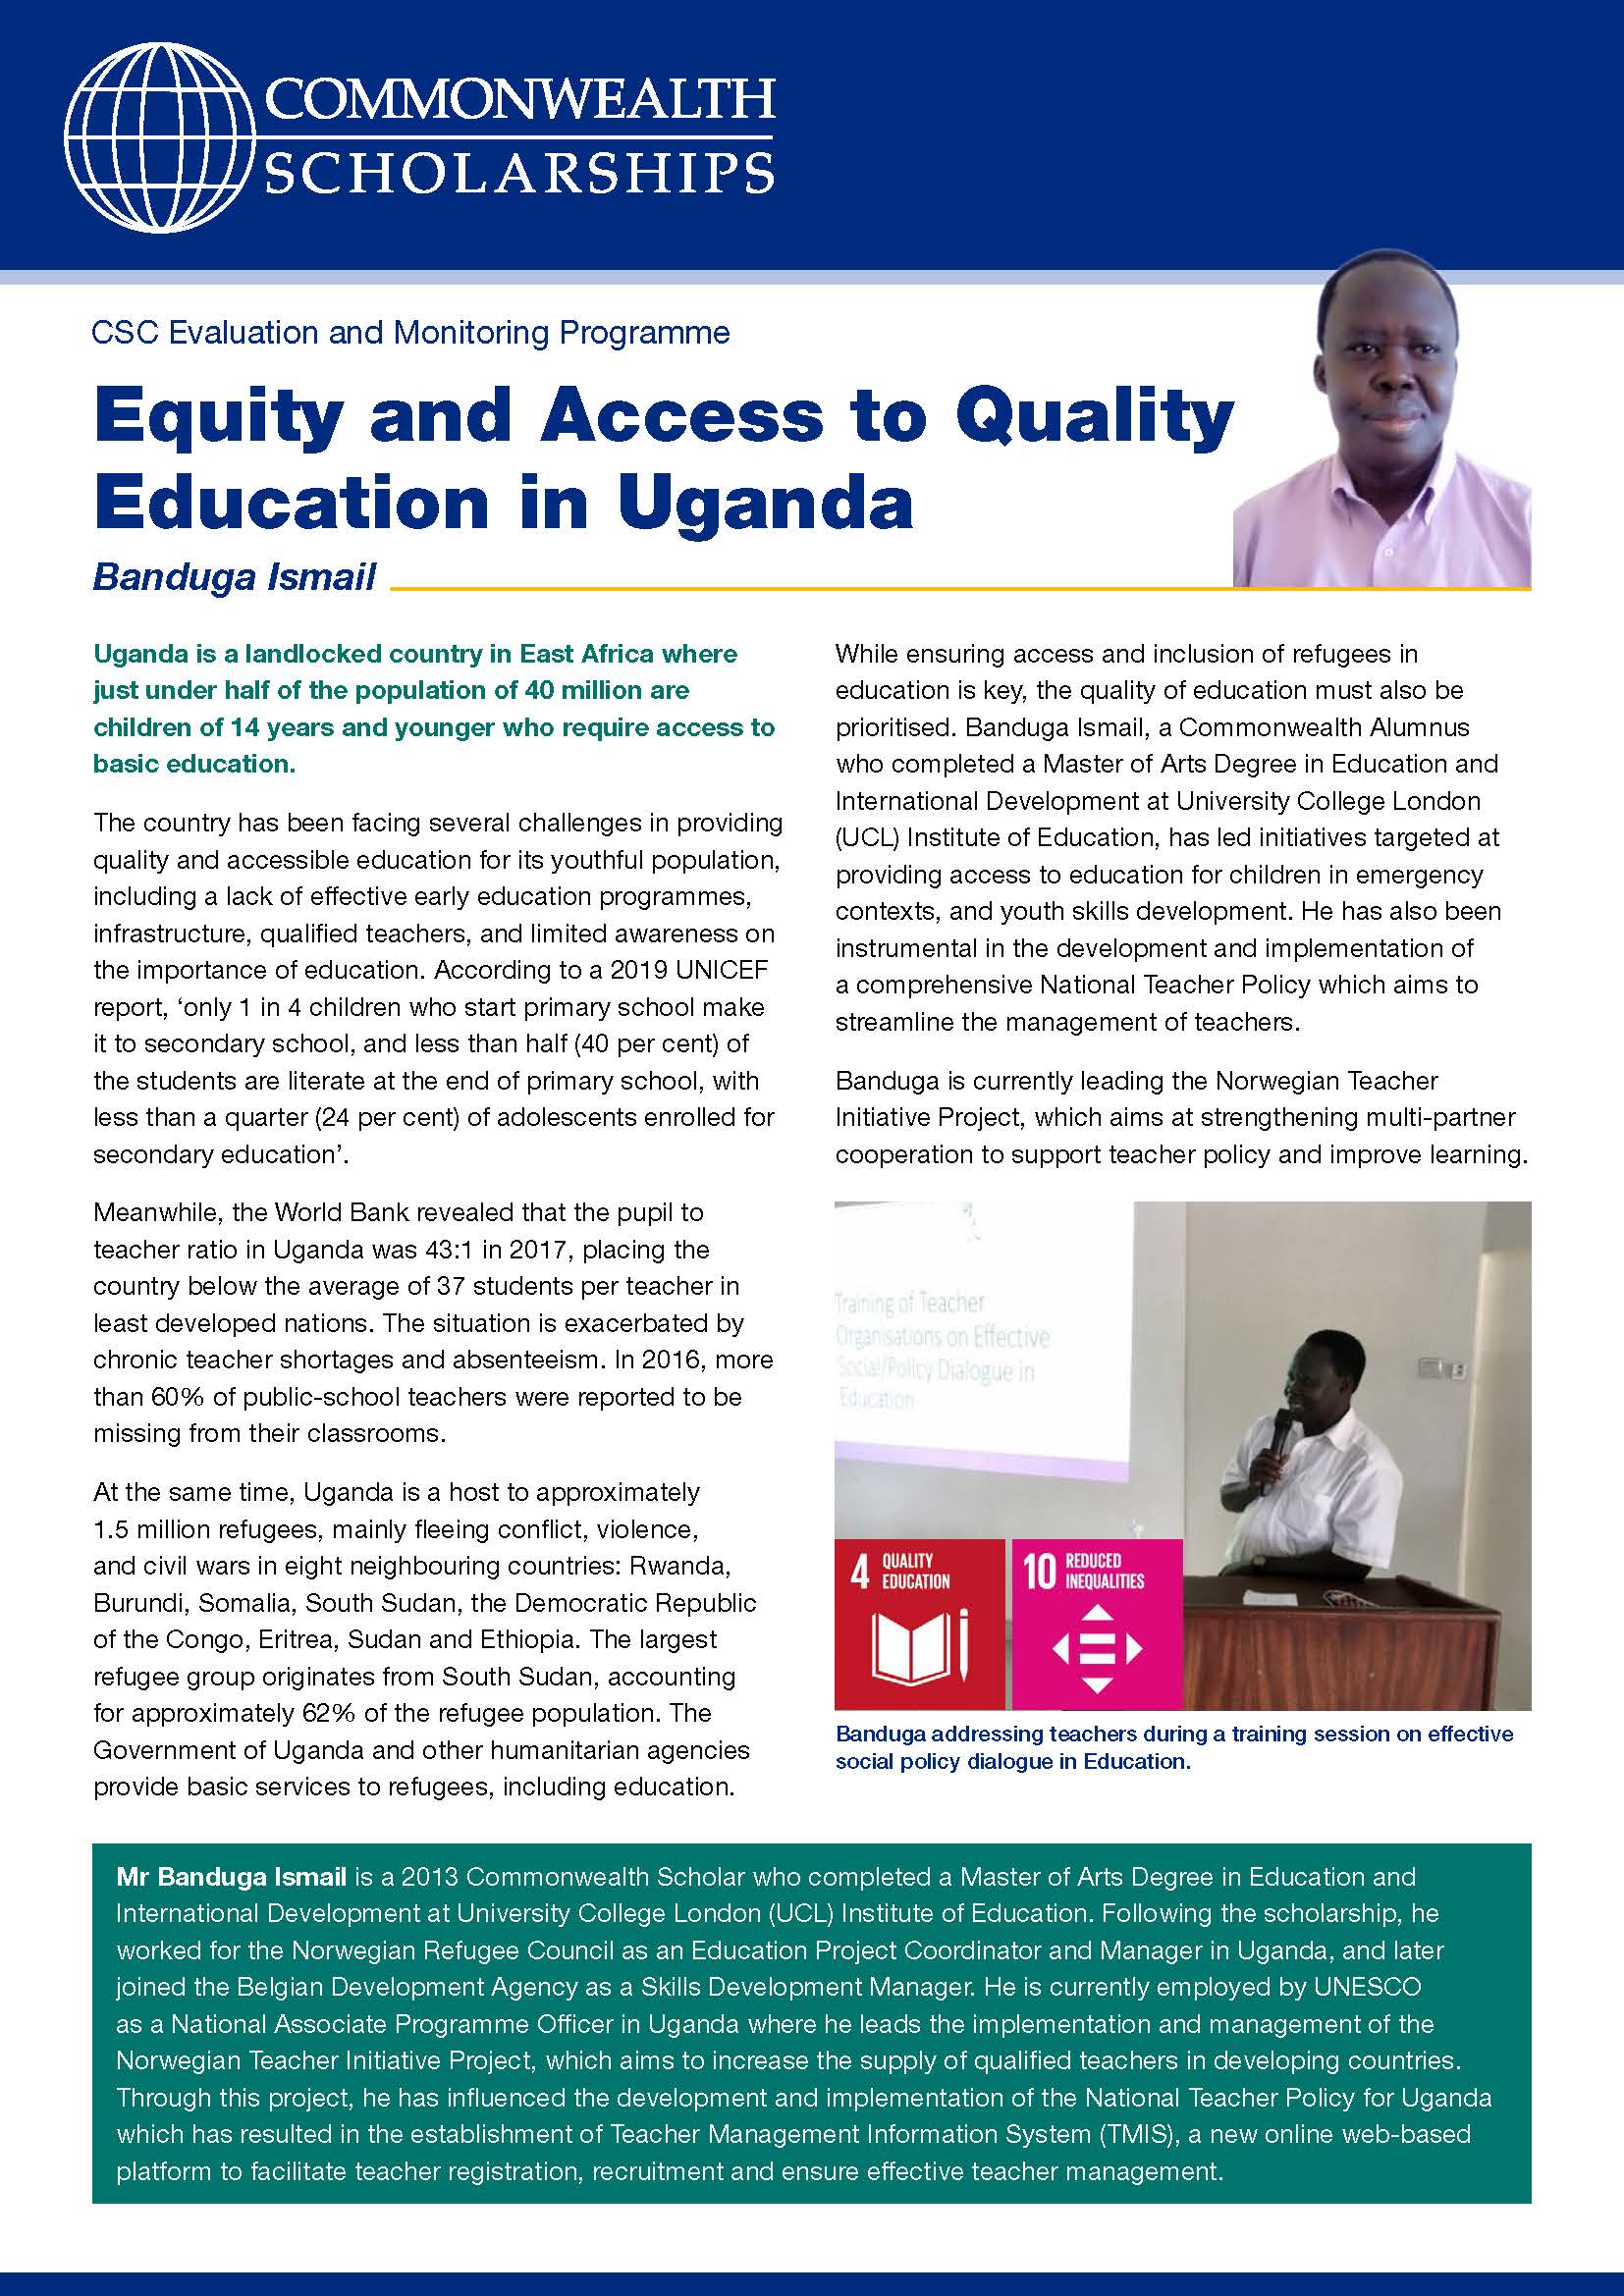 Read the Equity and Access to Quality Education in Uganda case study